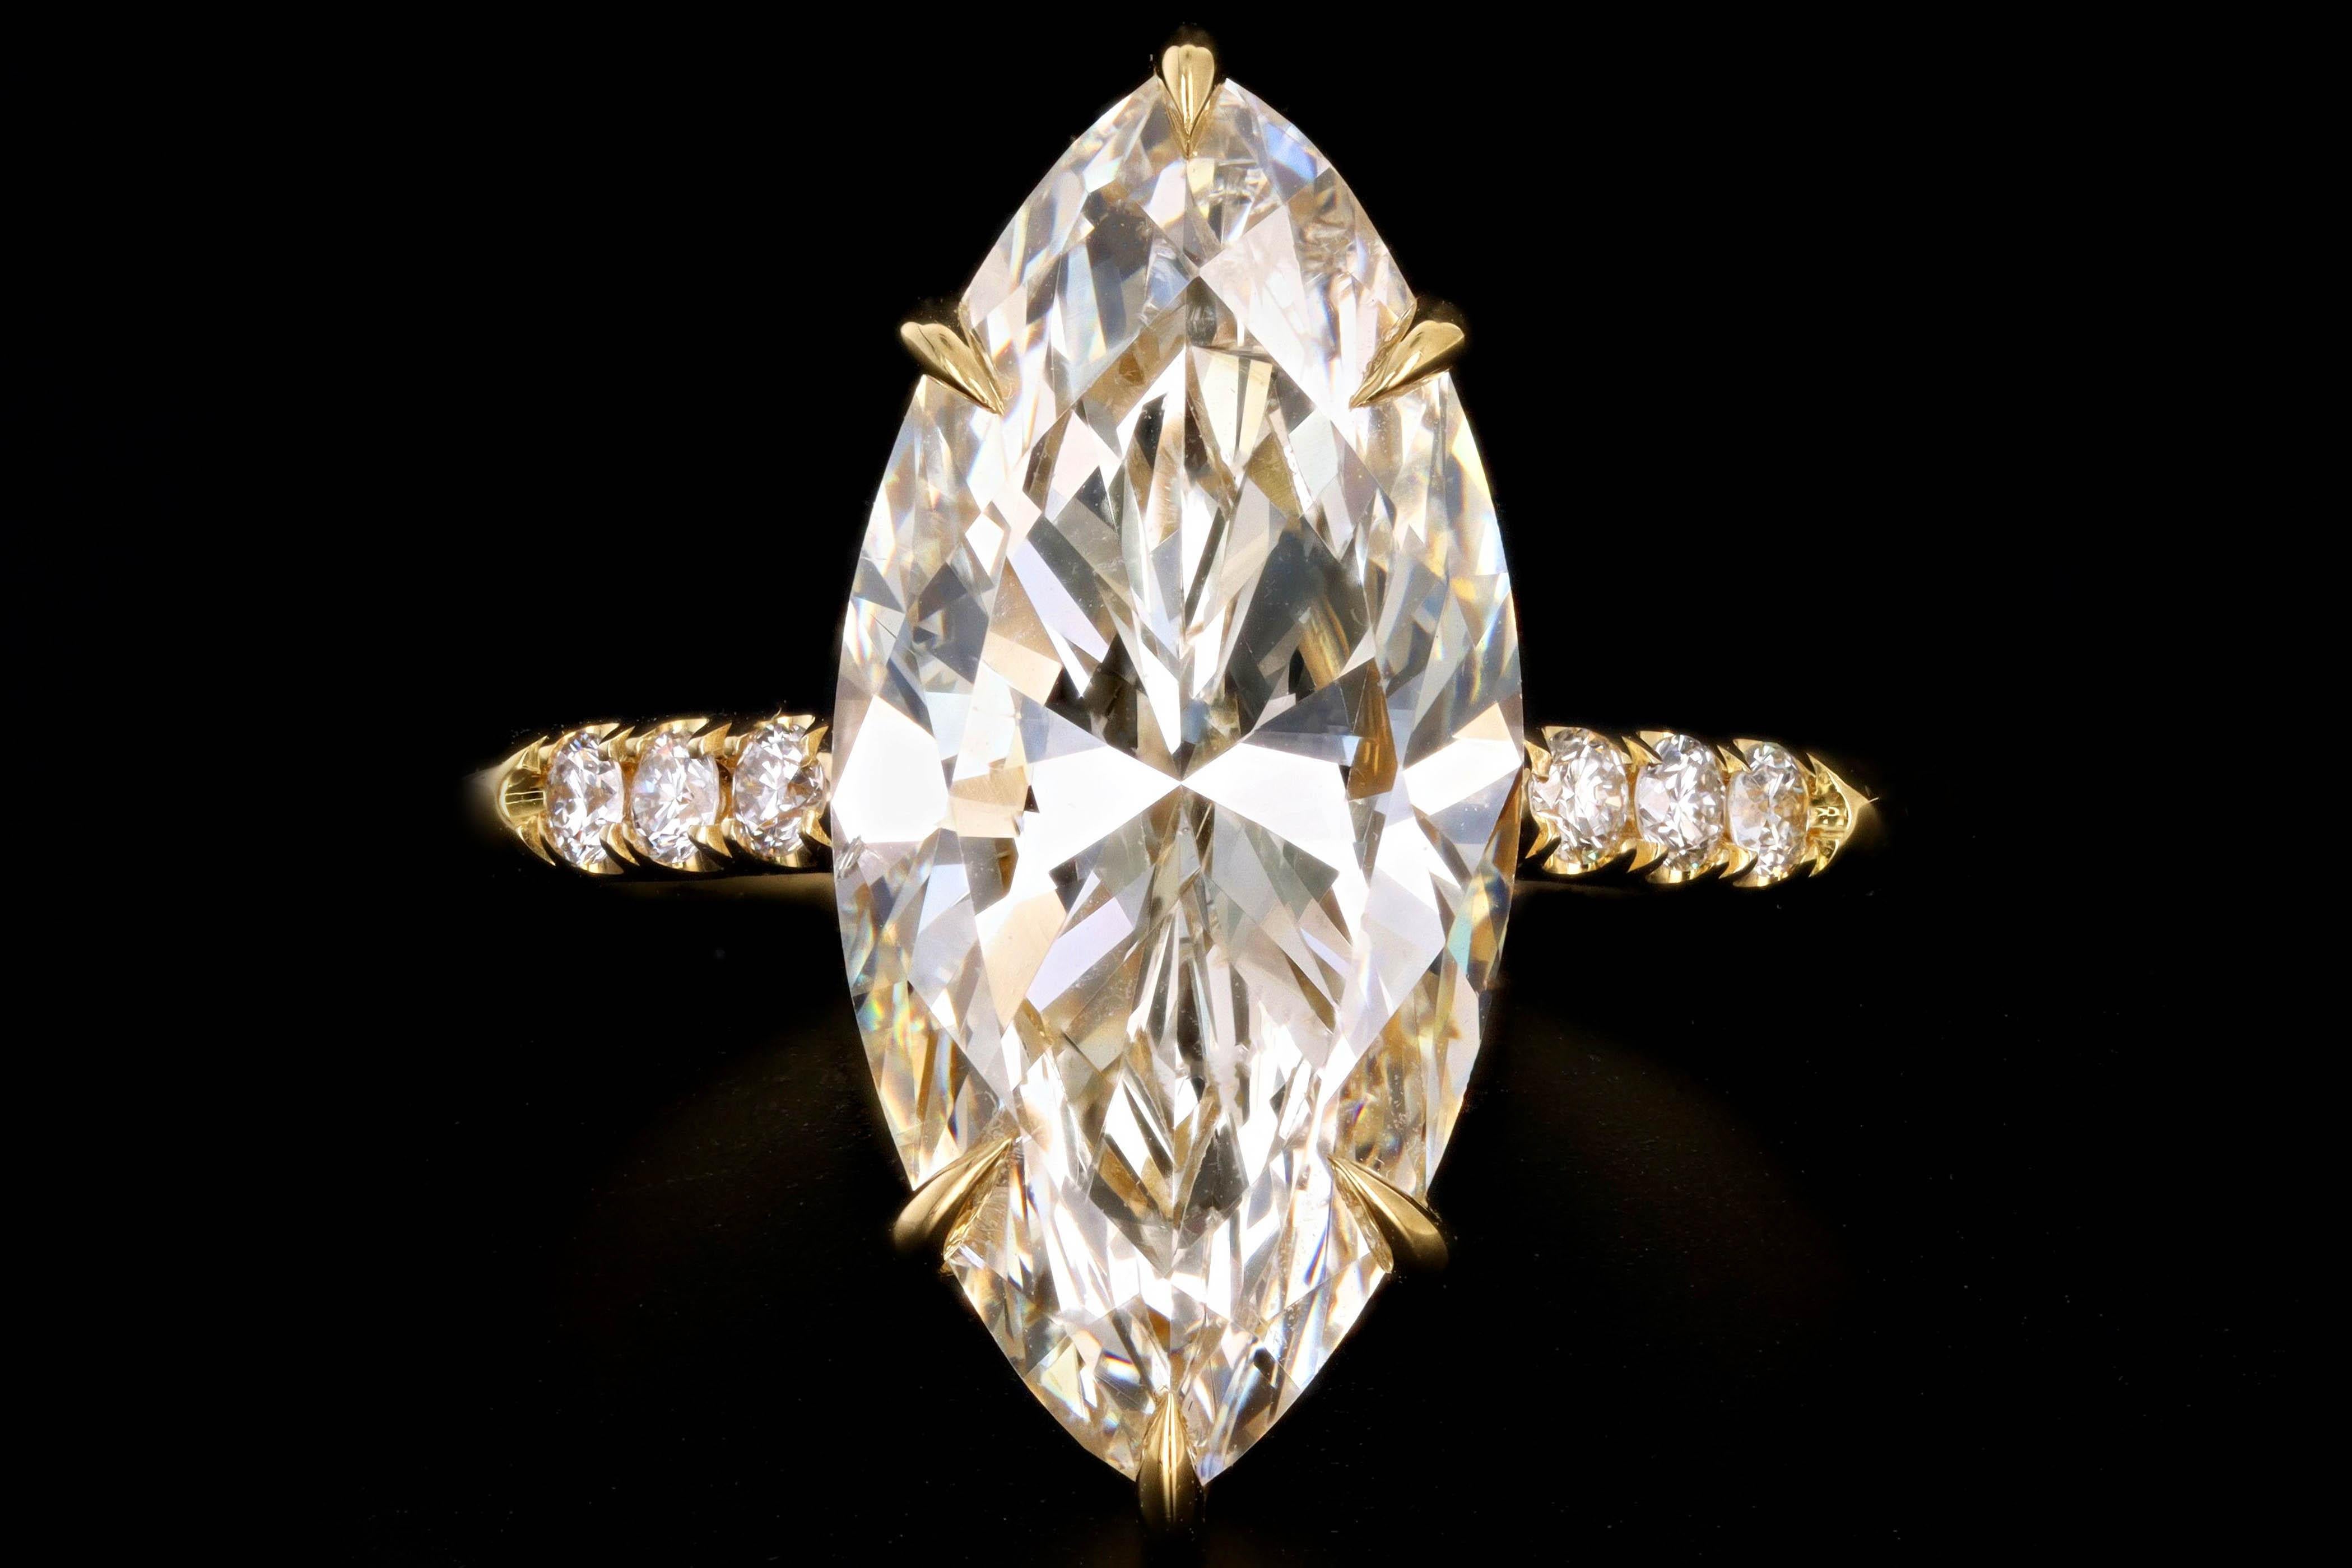 Era: New Vintage Inspired

Composition: 18K Yellow Gold

Primary Stone: Marquise Cut Diamond

Carat Weight: 4.63 Carats

Color/Clarity: K / I1

Accent Stone: Round Brilliant Diamonds

Carat Weight: Approximately .11 Carat Total

Color/Clarity: J/K -